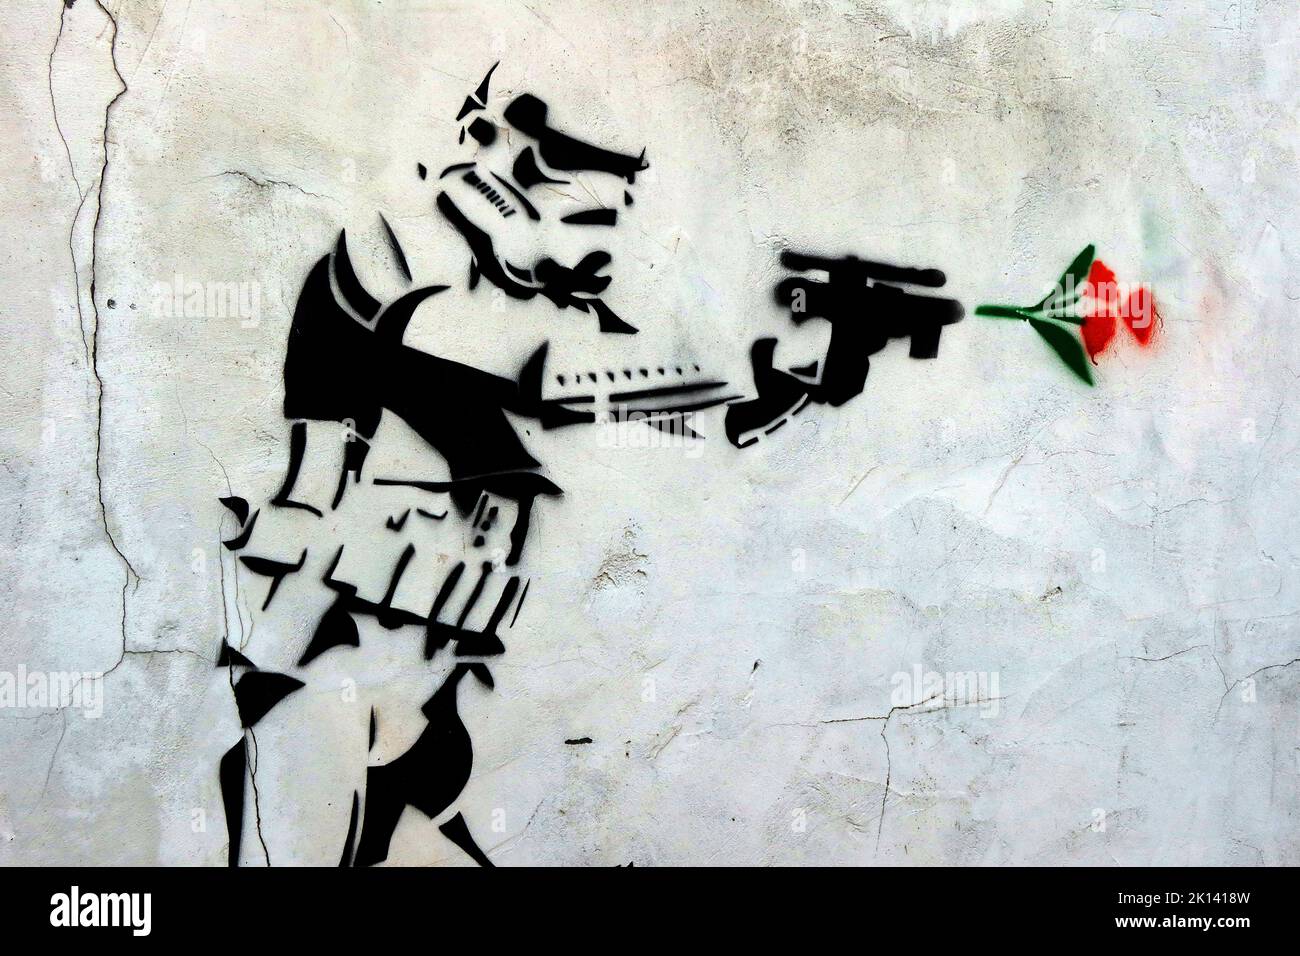 Stormtrooper fires a gun and a red rose comes out, stencil art in Church Street, Runcorn, Halton, Cheshire, England, UK, WA7 1LR Stock Photo